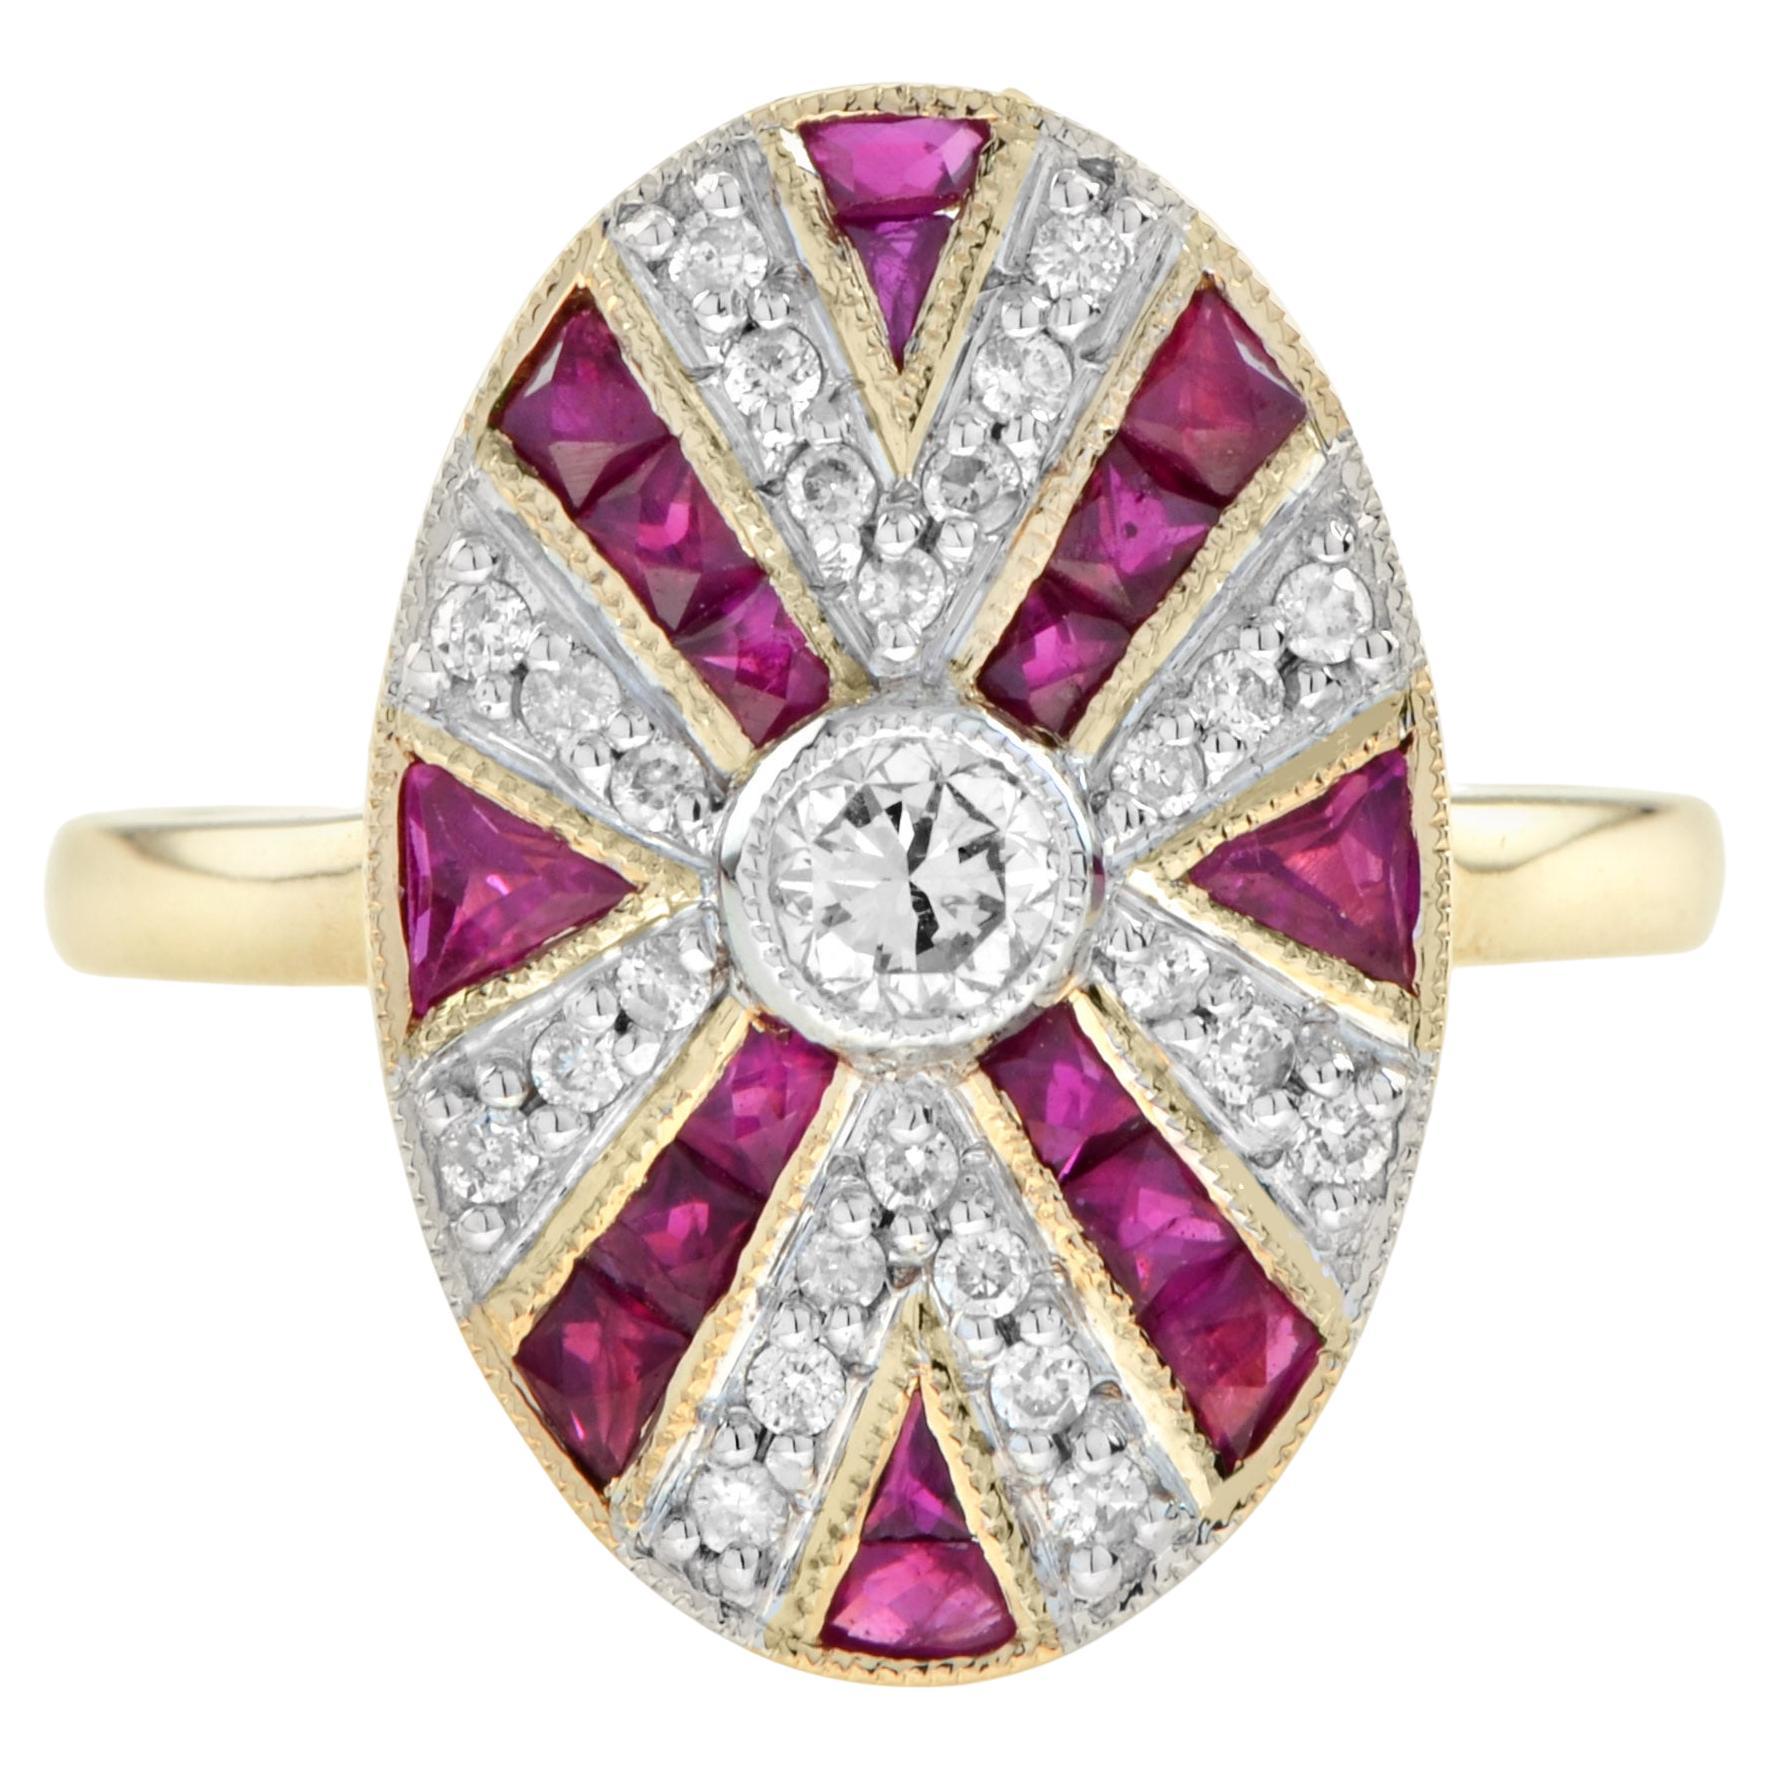 Diamond and Ruby Oval Shaped Art Deco Style Cocktail Ring in 14K Yellow Gold 